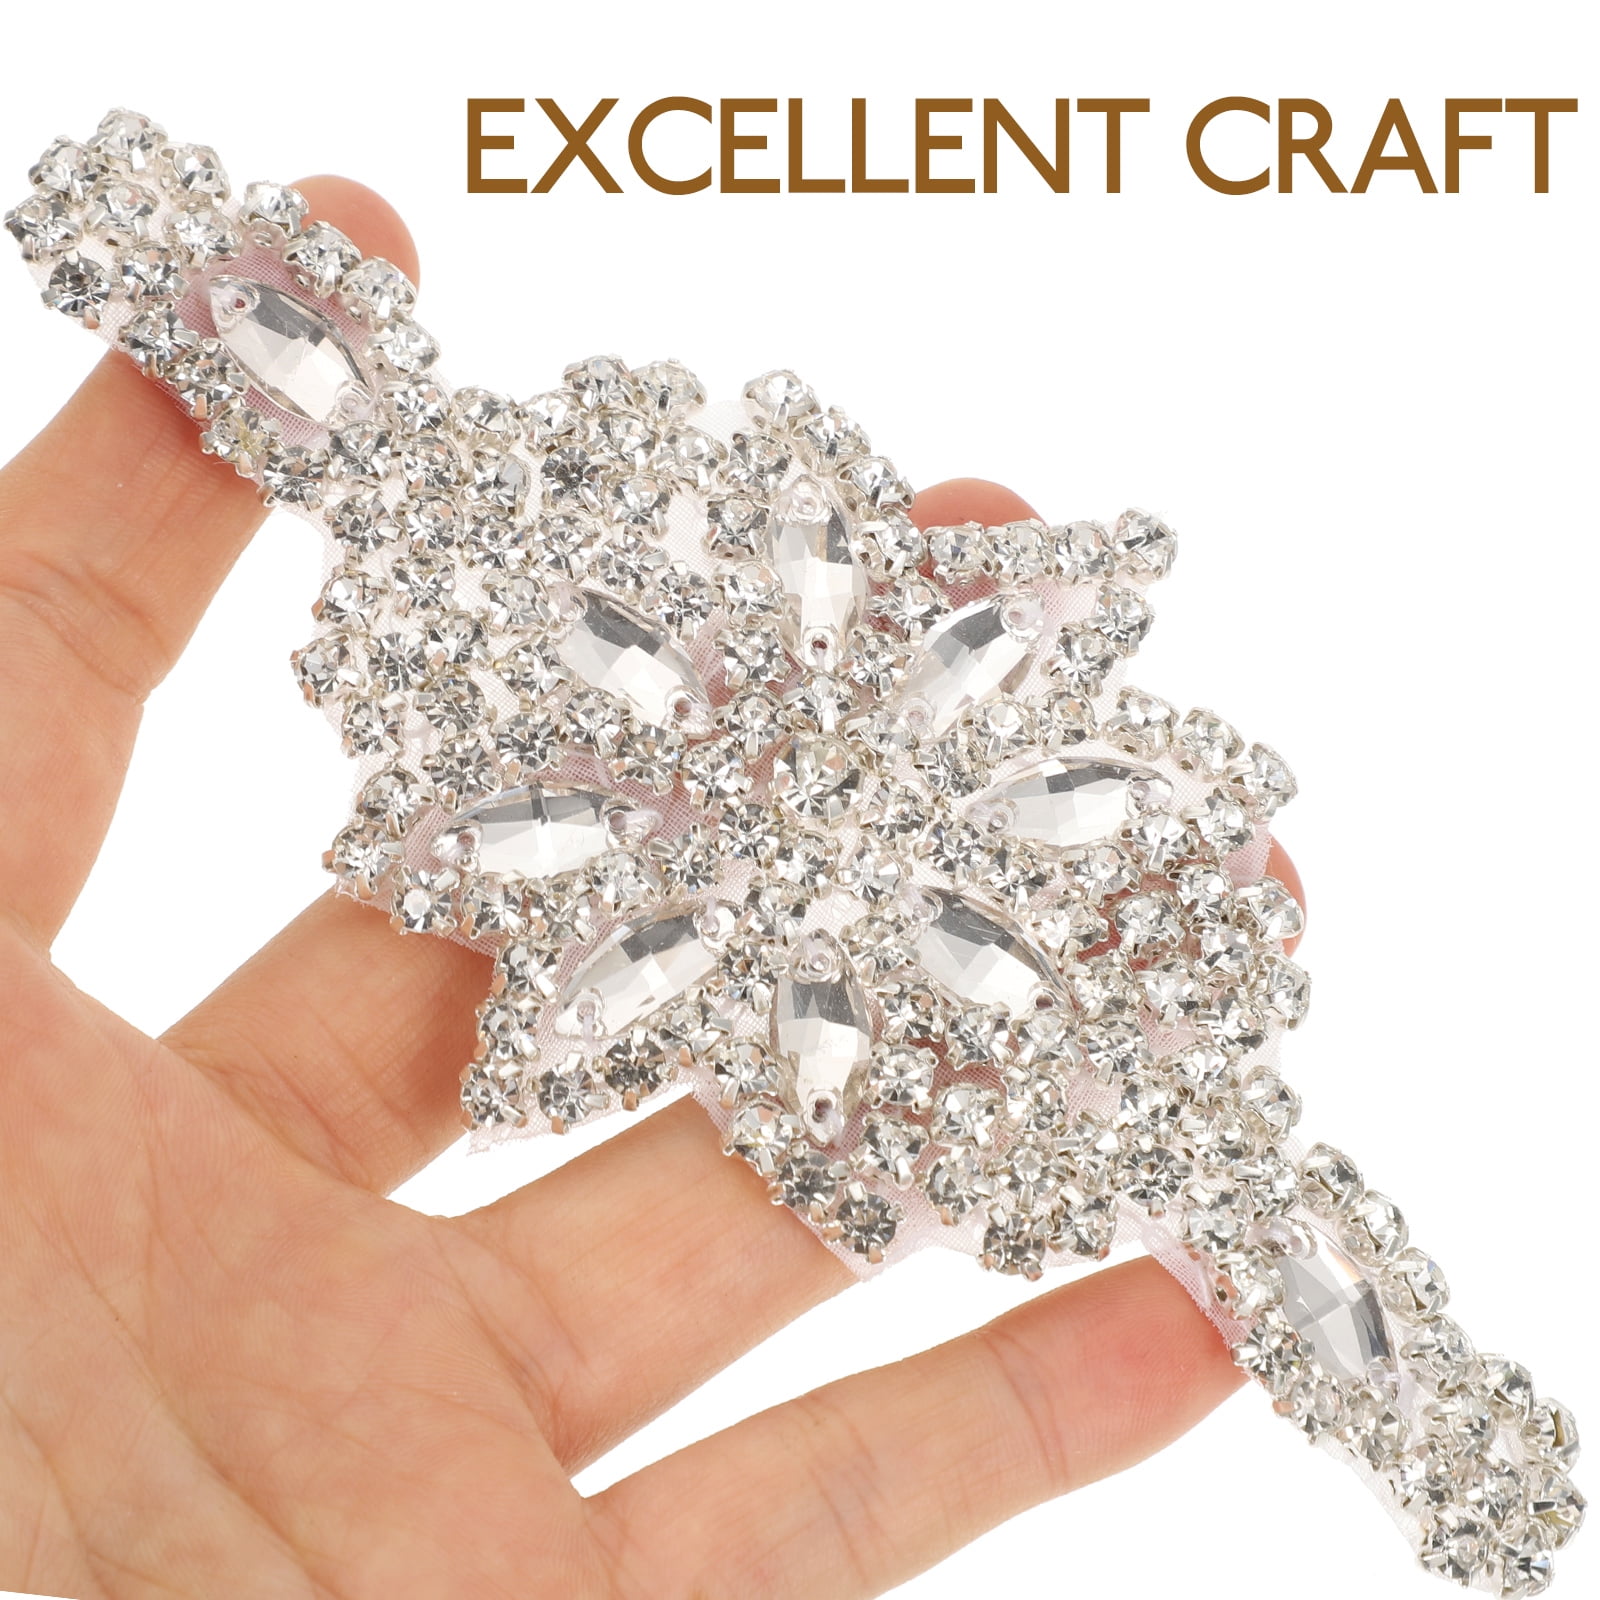  EXCEART 6 Pcs Rhinestone Applique Heat and Bond Lite for  Applique Rhinestone Iron on Letters DIY Back Patches Hotfix Rhinestones  Patches for Clothes Bride Do It Yourself Wedding Dress : Arts